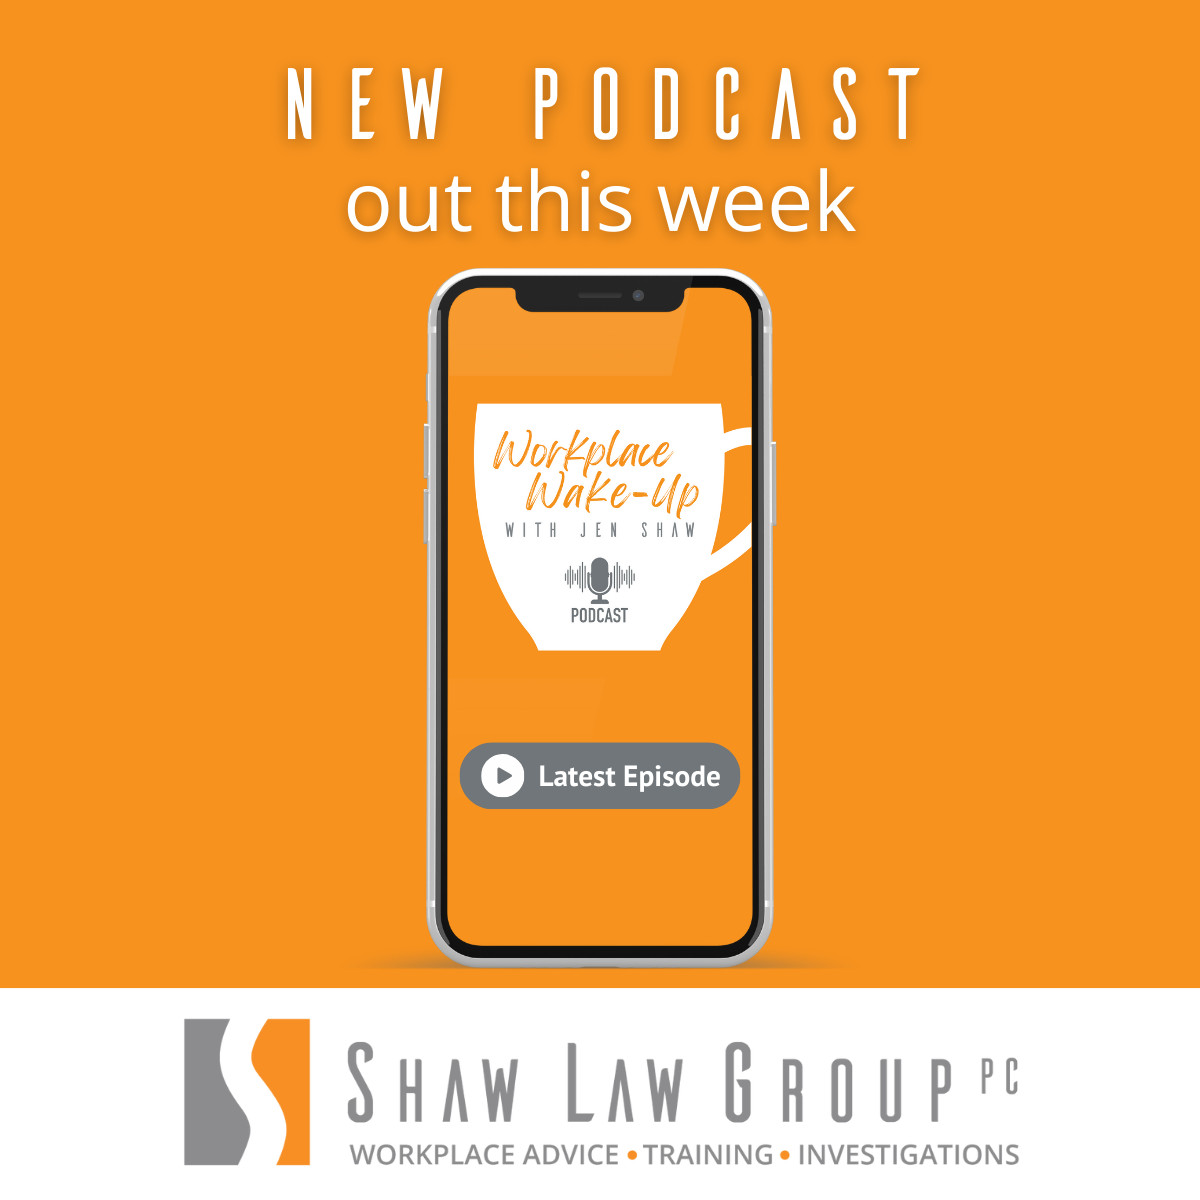 🎙️ Episode 122: In this episode, Jen explains why you cannot have a one-size-fits-all 'rulebook' for handling leaves of absence and accommodations.
shawlawgroup.com/podcasts/

#LeaveManagement #AccommodationPolicy #WorkplaceFlexibility #HRInsights #JenTalksLaw, #workplacewakeup